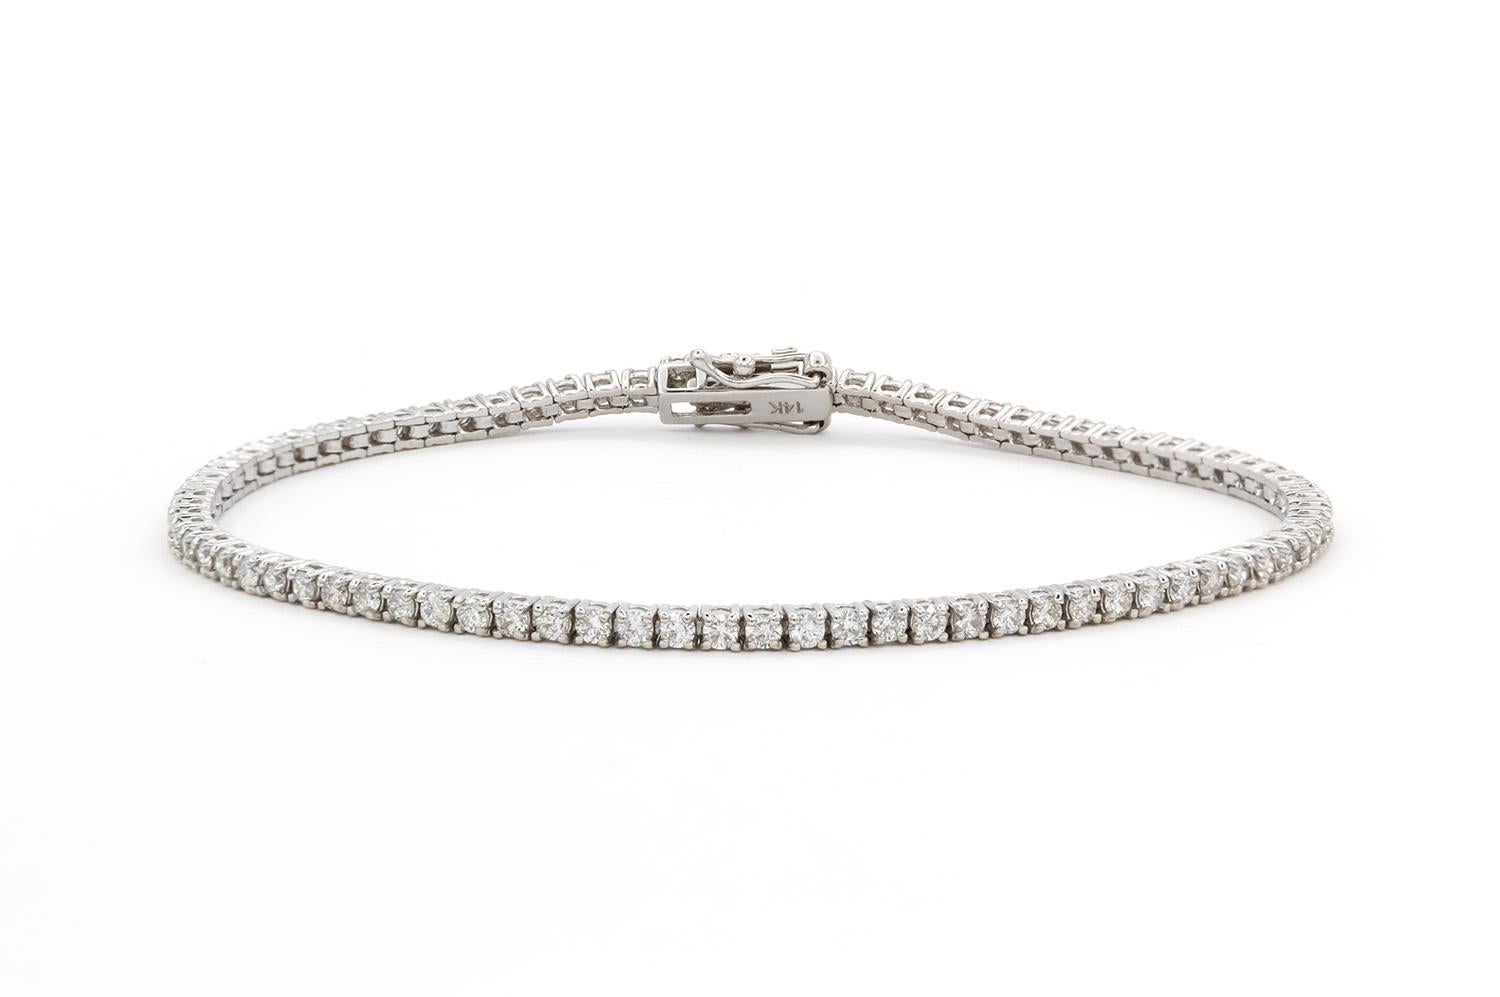 We are pleased to present this beautiful Like New 14k White Gold & Diamond Tennis Bracelet. It features 2.06ctw G-H/VS2-SI1 Round Brilliant Cut Diamonds set in this 14k white gold tennis bracelet. The bracelet measures 7″ long and features a push